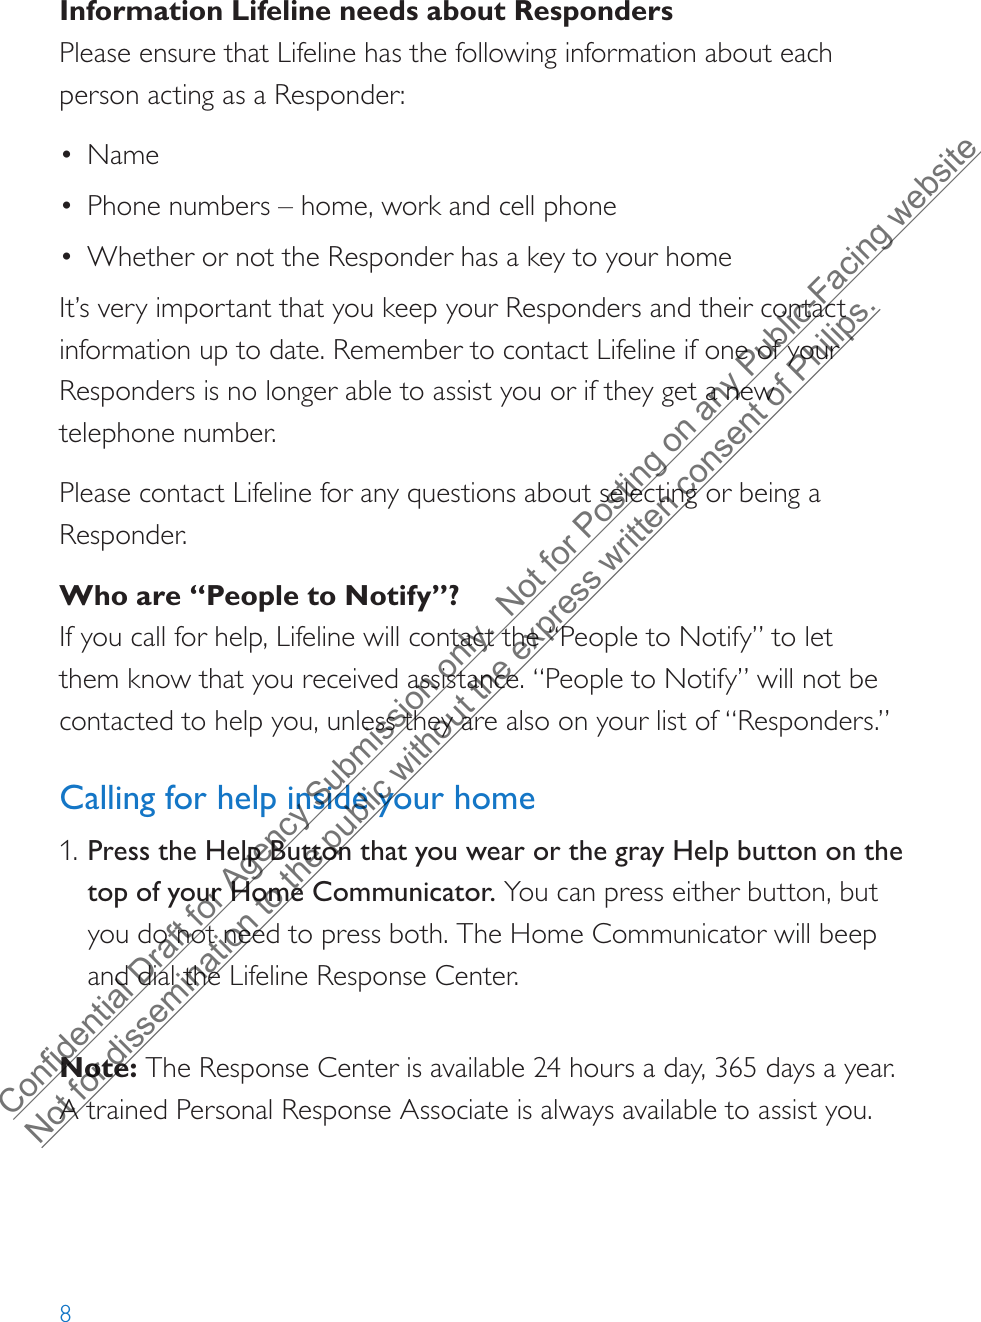 8Information Lifeline needs about RespondersPlease ensure that Lifeline has the following information about each person acting as a Responder:•Name•Phone numbers – home, work and cell phone•Whether or not the Responder has a key to your homeIt’s very important that you keep your Responders and their contact information up to date. Remember to contact Lifeline if one of your Responders is no longer able to assist you or if they get a new  telephone number.Please contact Lifeline for any questions about selecting or being a Responder.Who are “People to Notify”?If you call for help, Lifeline will contact the “People to Notify” to let them know that you received assistance. “People to Notify” will not be contacted to help you, unless they are also on your list of “Responders.”Calling for help inside your home1. Press the Help Button that you wear or the gray Help button on thetop of your Home Communicator. You can press either button, butyou do not need to press both. The Home Communicator will beepand dial the Lifeline Response Center.Note: The Response Center is available 24 hours a day, 365 days a year. A trained Personal Response Associate is always available to assist you.Confidential Draft for Agency Submission only.  Not for Posting on any Public-Facing website Not for dissemination to the public without the express written consent of Philips.  